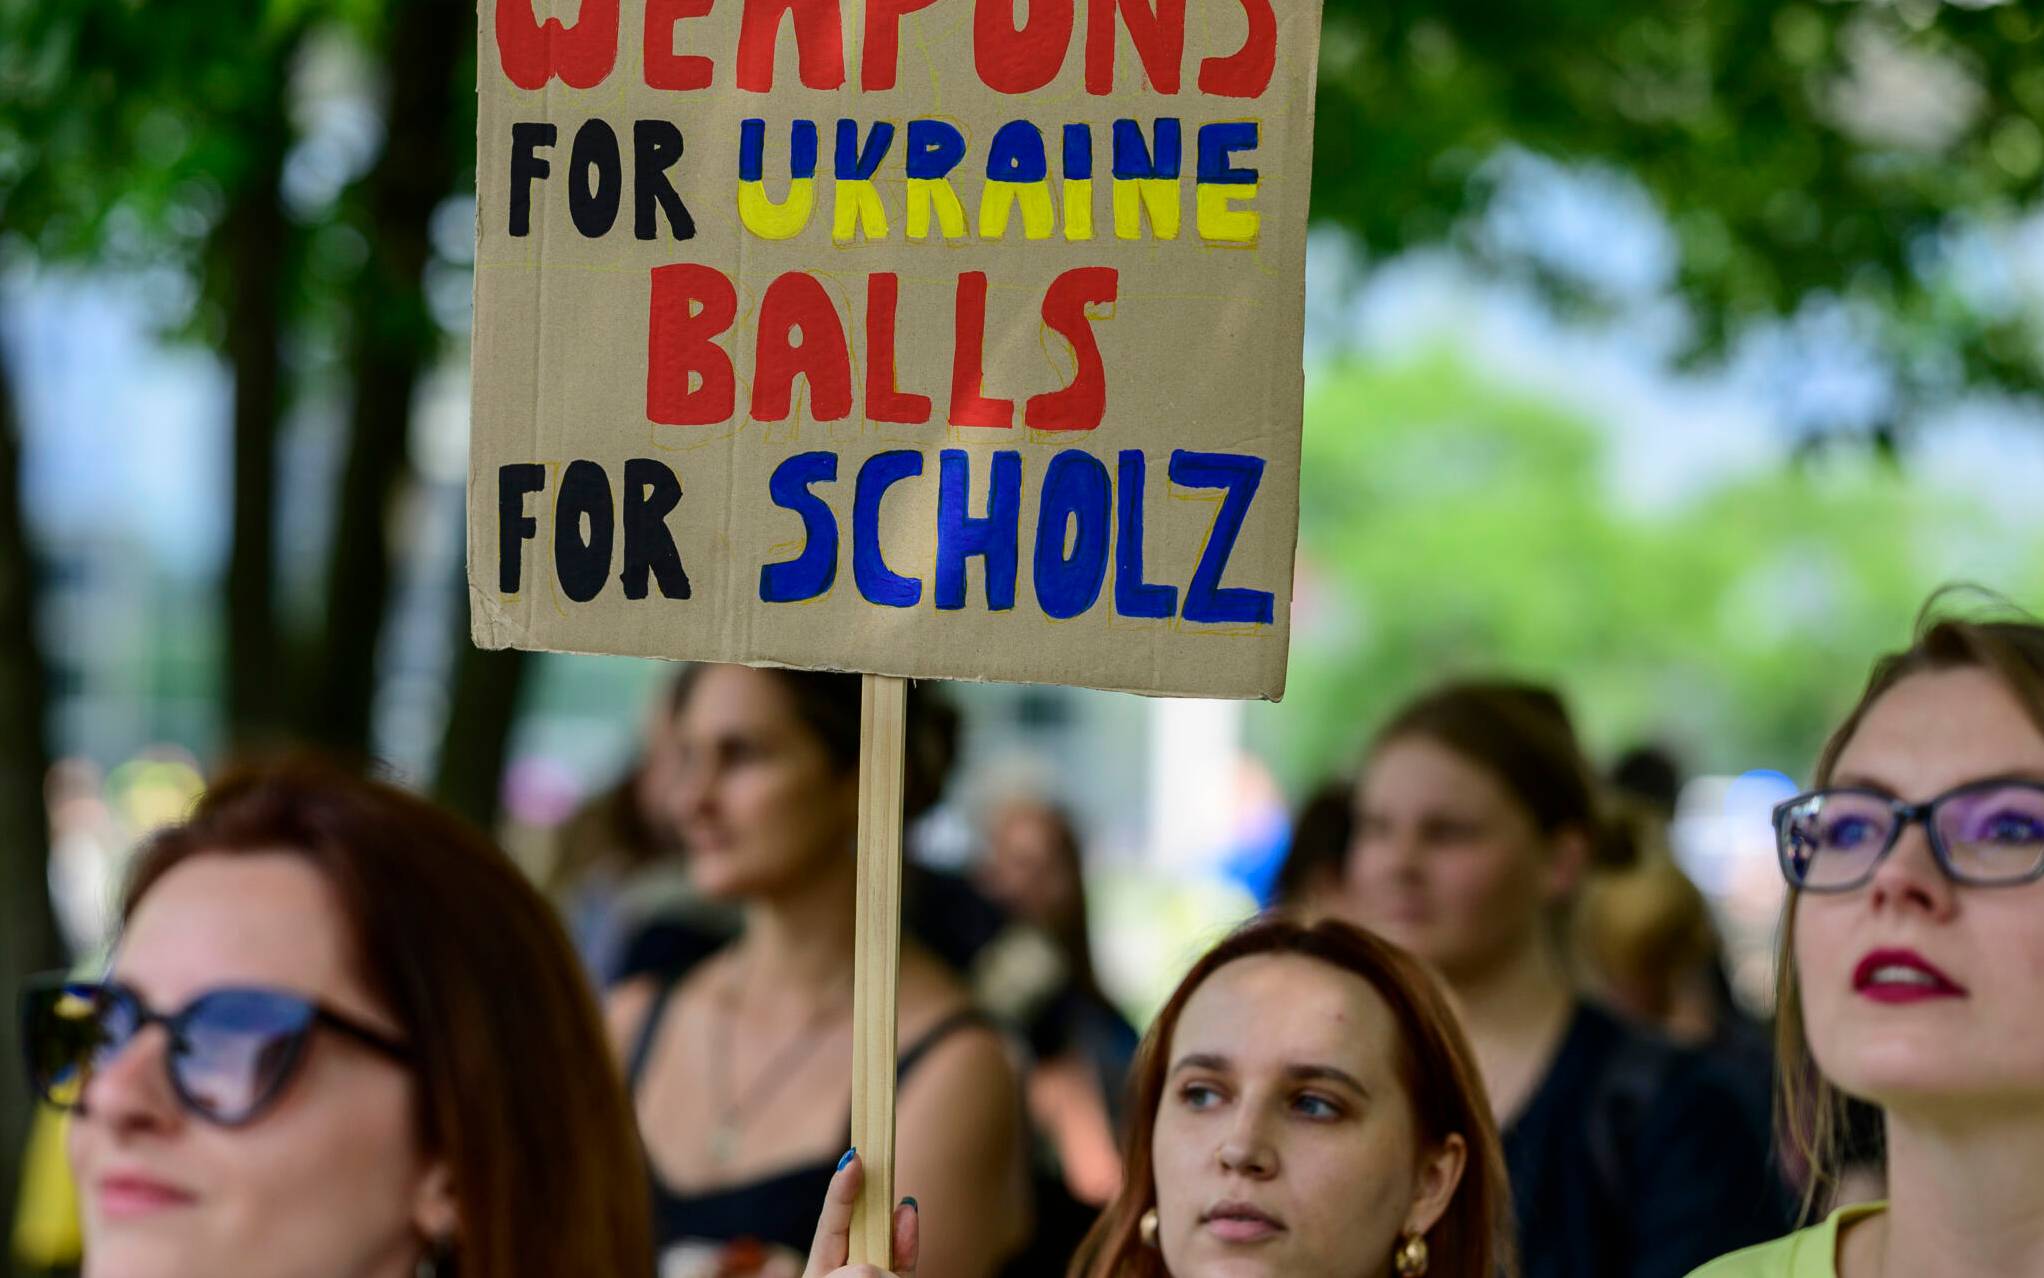 A woman displays a placard reading 'Weapons for Ukraine - balls for Scholz' during a demonstration to thank Germany for its support of Ukraine in Berlin on June 11, 2022. (Photo by John MACDOUGALL / AFP)